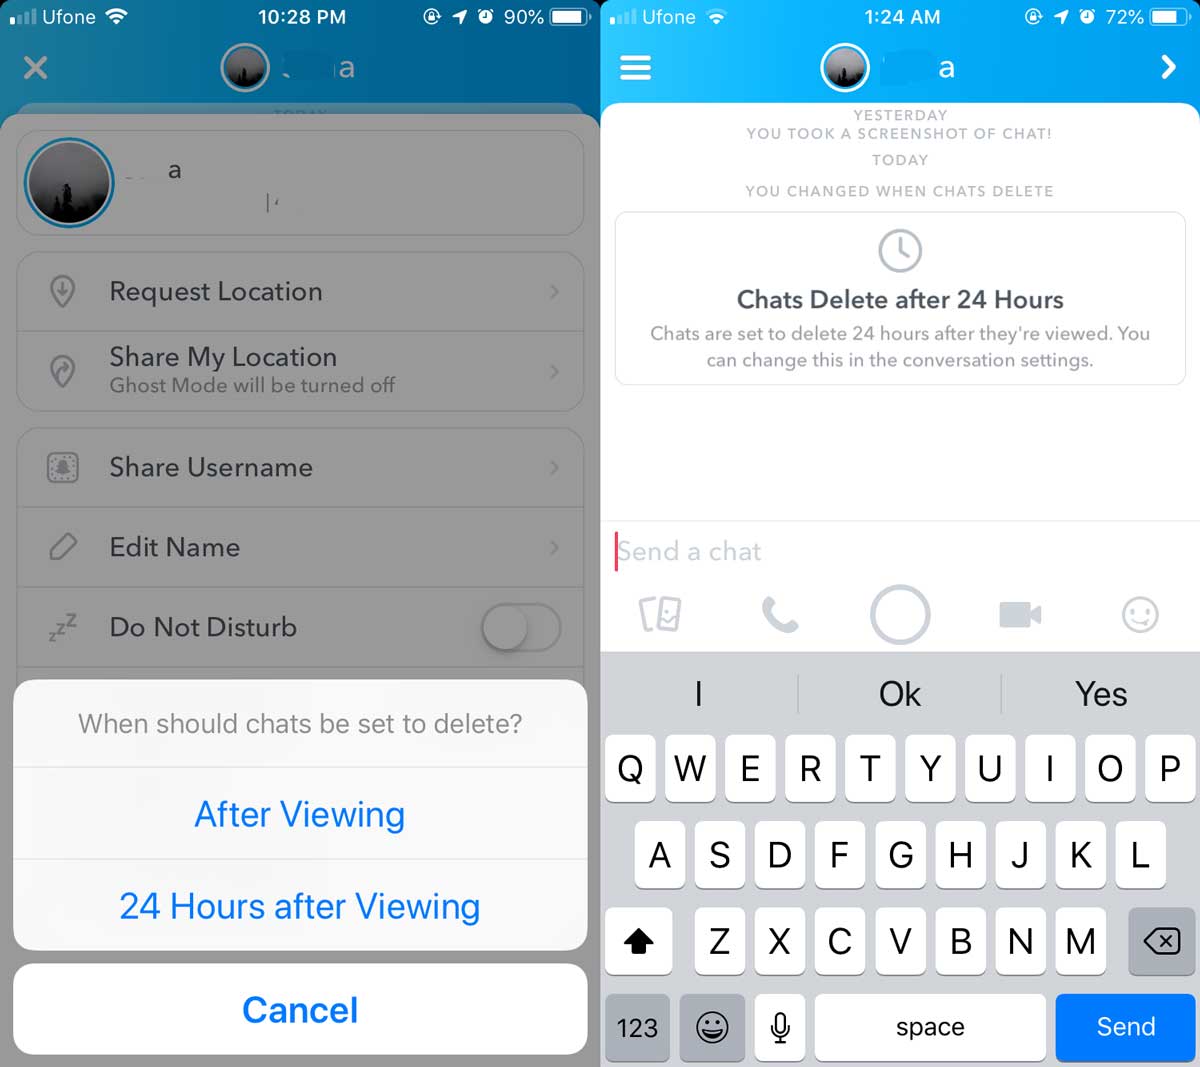 How To Change When Messages Expire On Snapchat